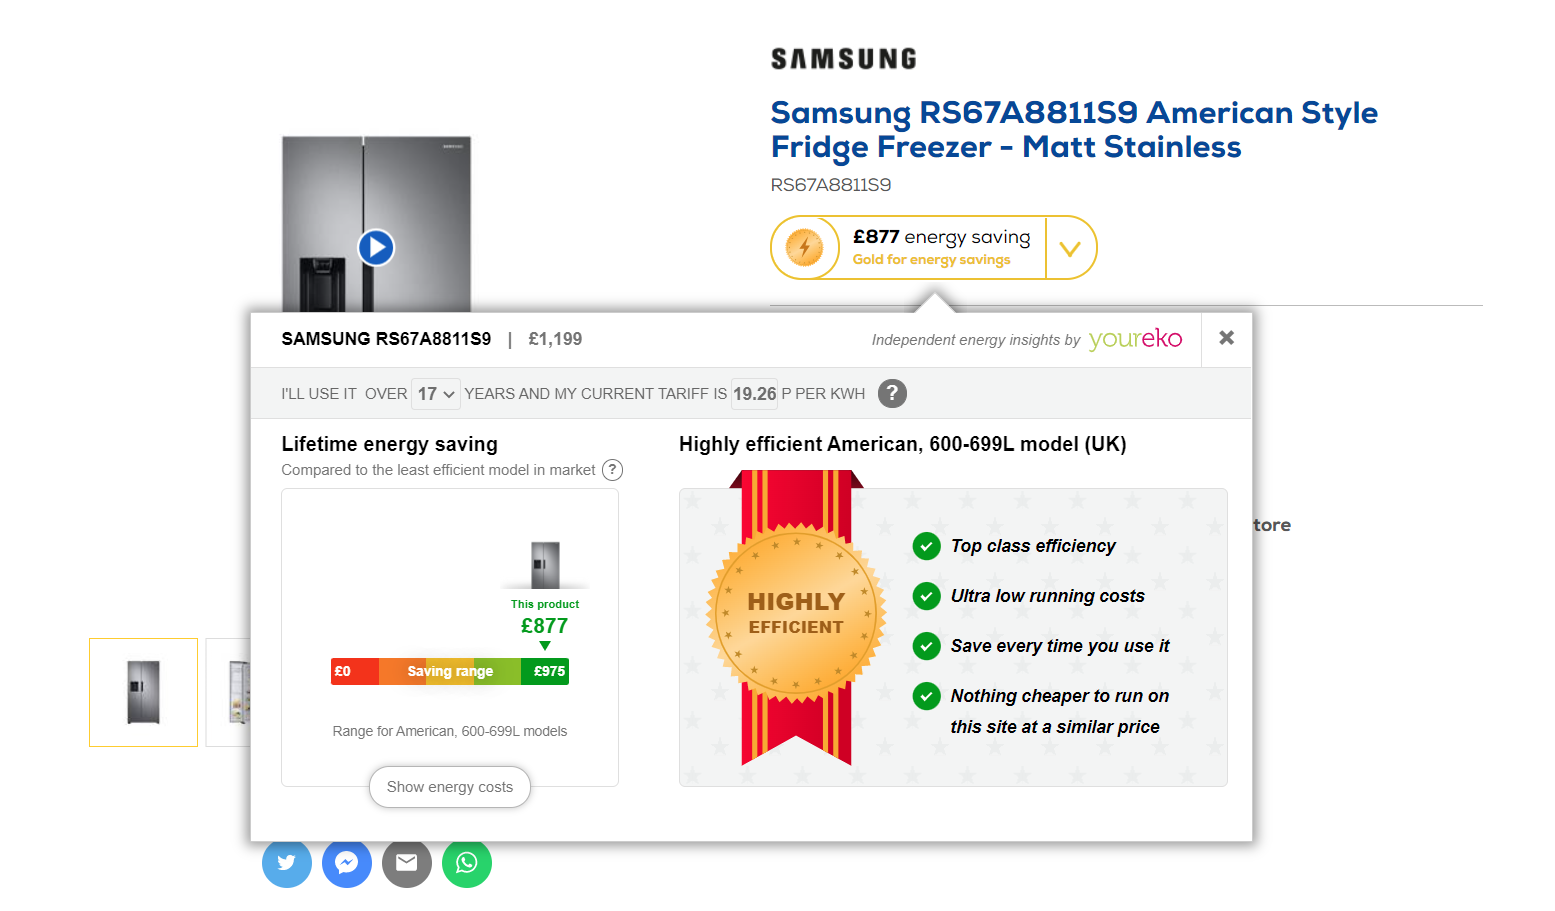 The Youreko tool shows information on a refrigerator